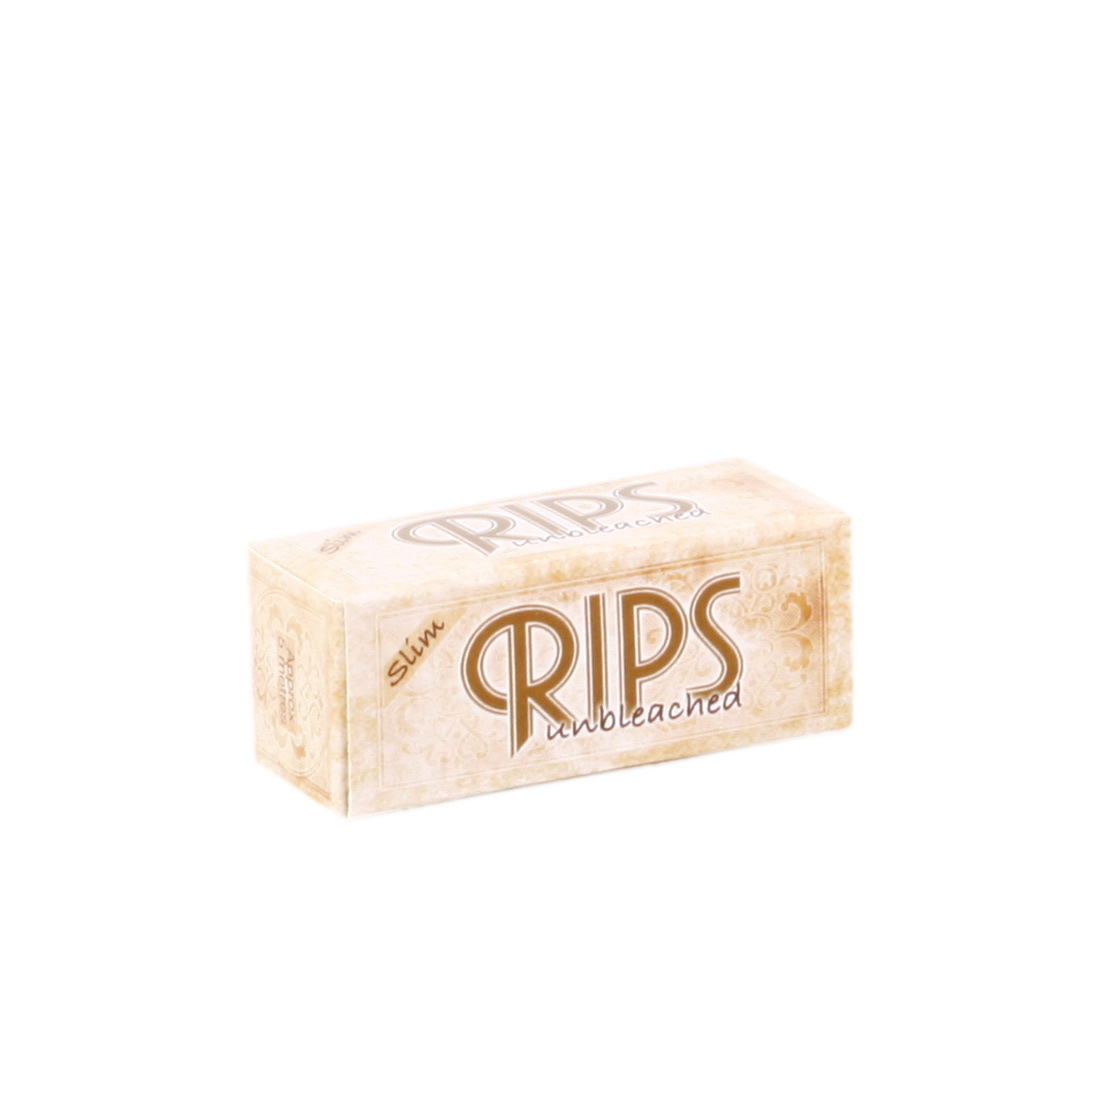 rips roll